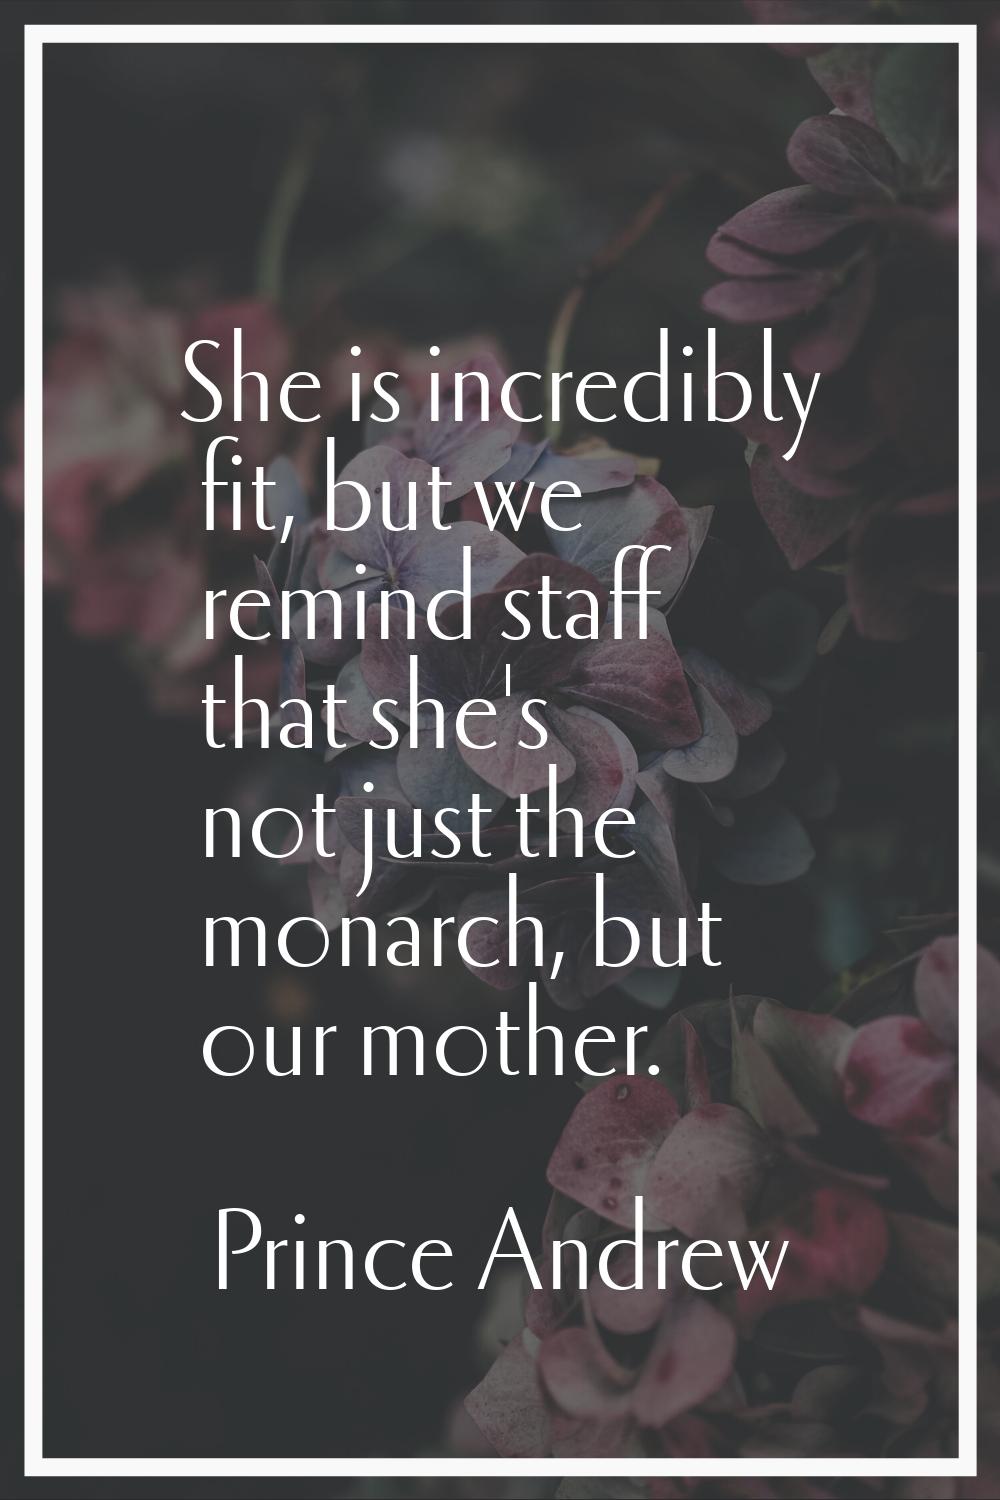 She is incredibly fit, but we remind staff that she's not just the monarch, but our mother.